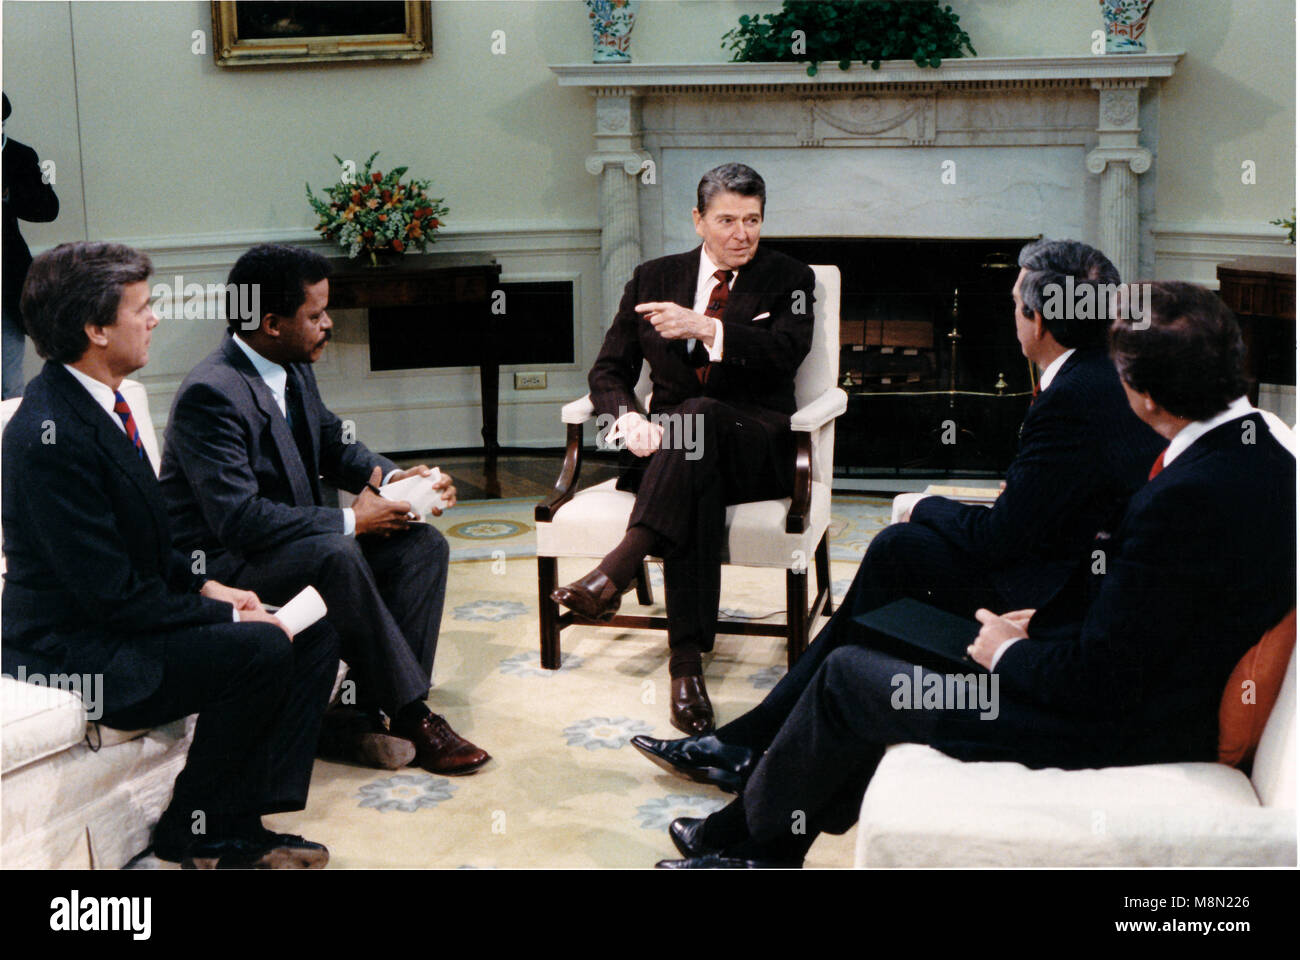 United States President Ronald Reagan makes a point during an interview with television network anchors in the Oval Office of the White House in Washington, D.C. on Thursday, December 3, 1987.  Seated, from left, are: Tom Brokaw of NBC; Bernard Shaw of CNN; President Reagan; Dan Rather of CBS; and Peter Jennings of ABC. .Mandatory Credit: Bill Fitz-Patrick - White House via CNP /MediaPunch Stock Photo